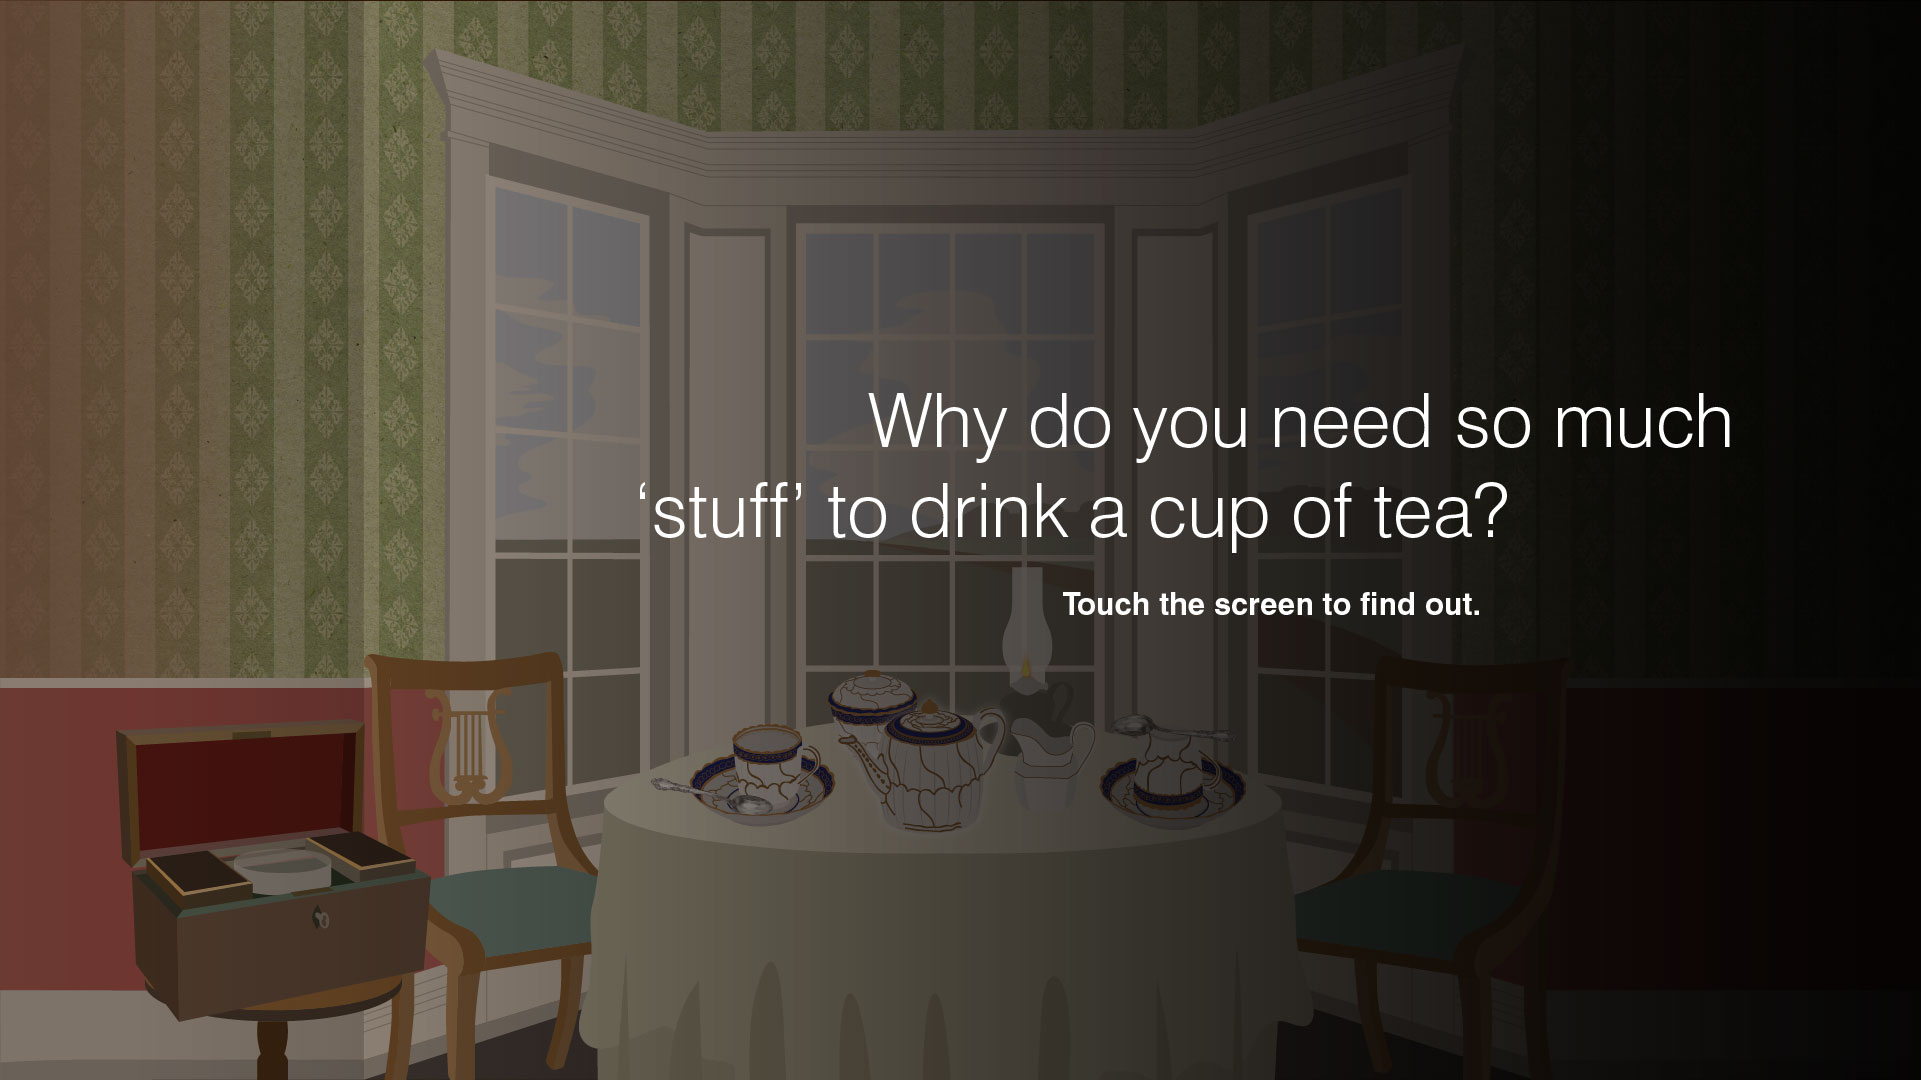 Why do you need so much 'stuff' to drink tea? Touch the screen to find out.